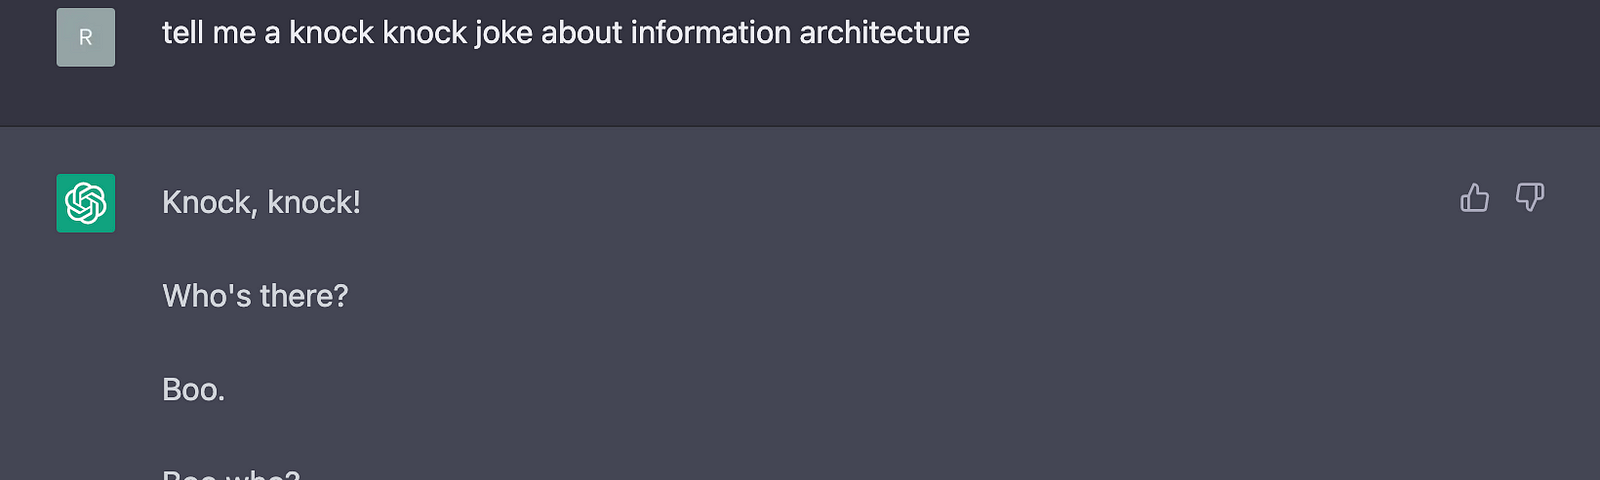 A screnshot of a ChatGPT prompt asking for a joke about information architecture